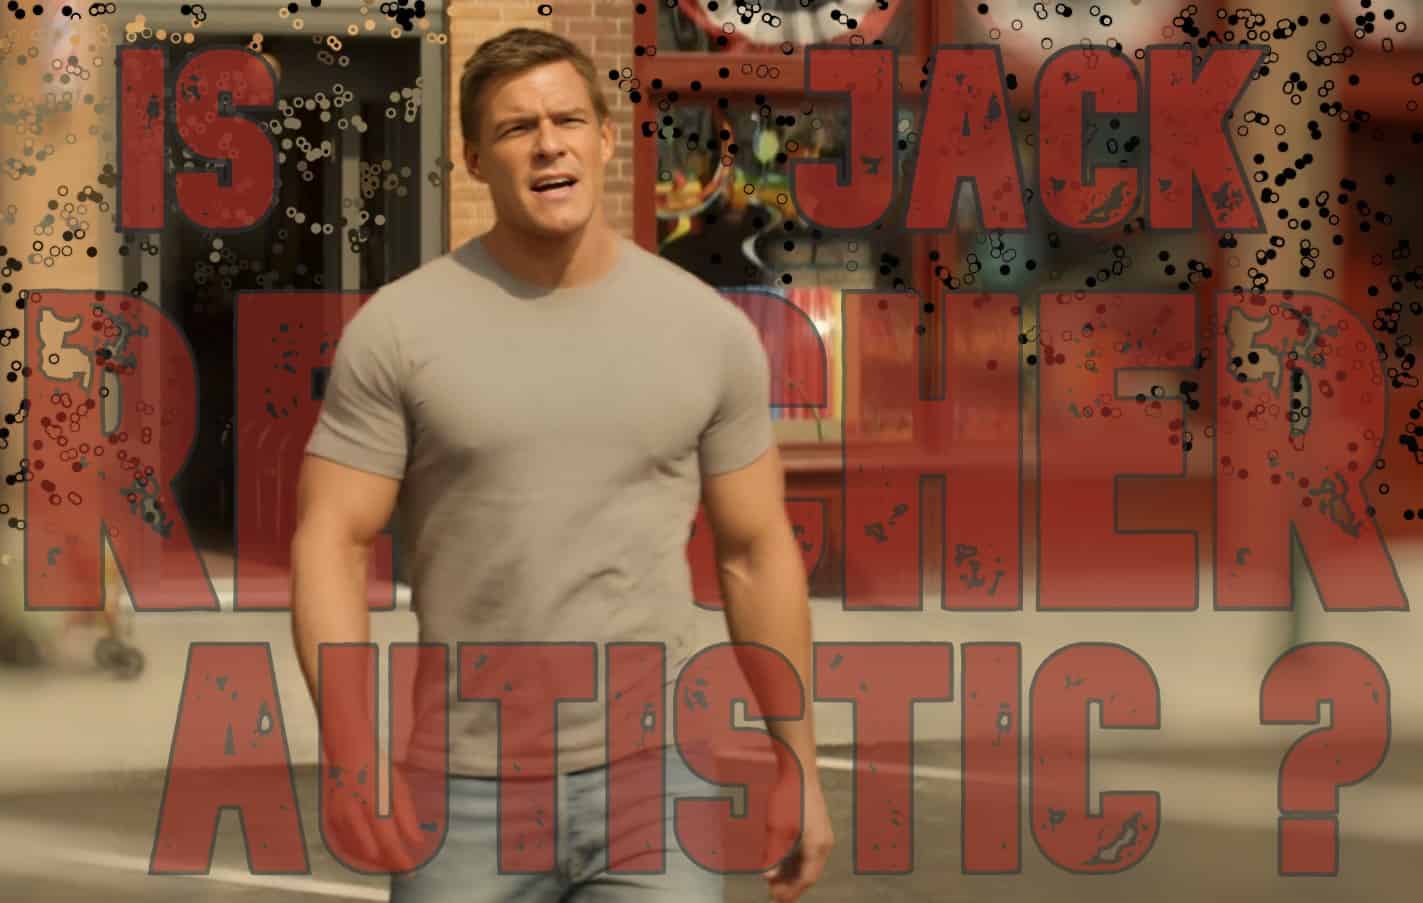 Unraveling the Mystery: Does Jack Reacher Embody Autism Spectrum Traits?